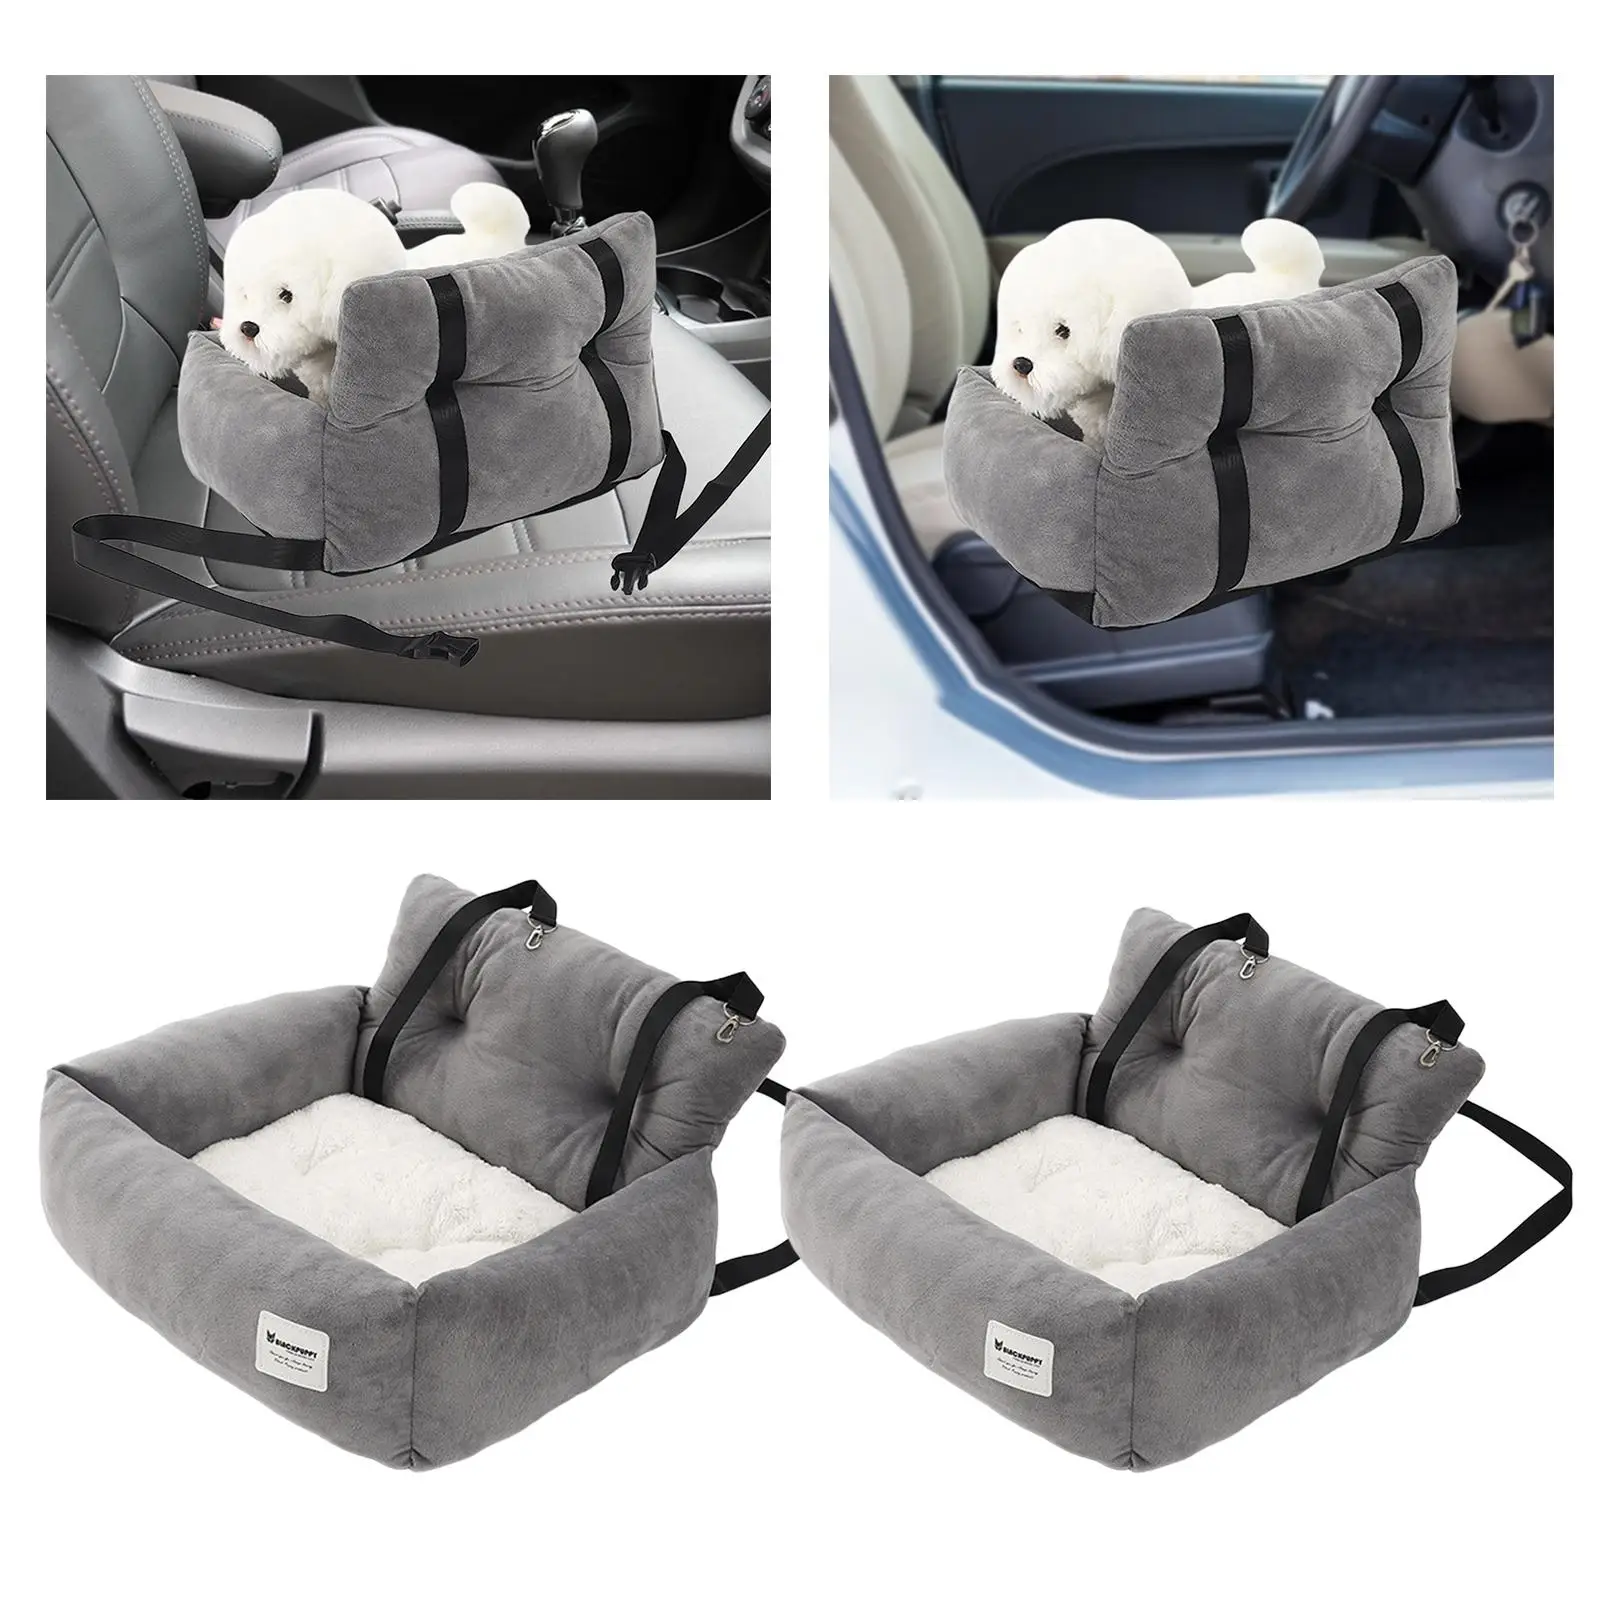 Dog Car SUV Seat Puppy Bed with Fixed Strap Multifunctional Removable Anti Slip Bottom Washable Portable Gray for Traveling